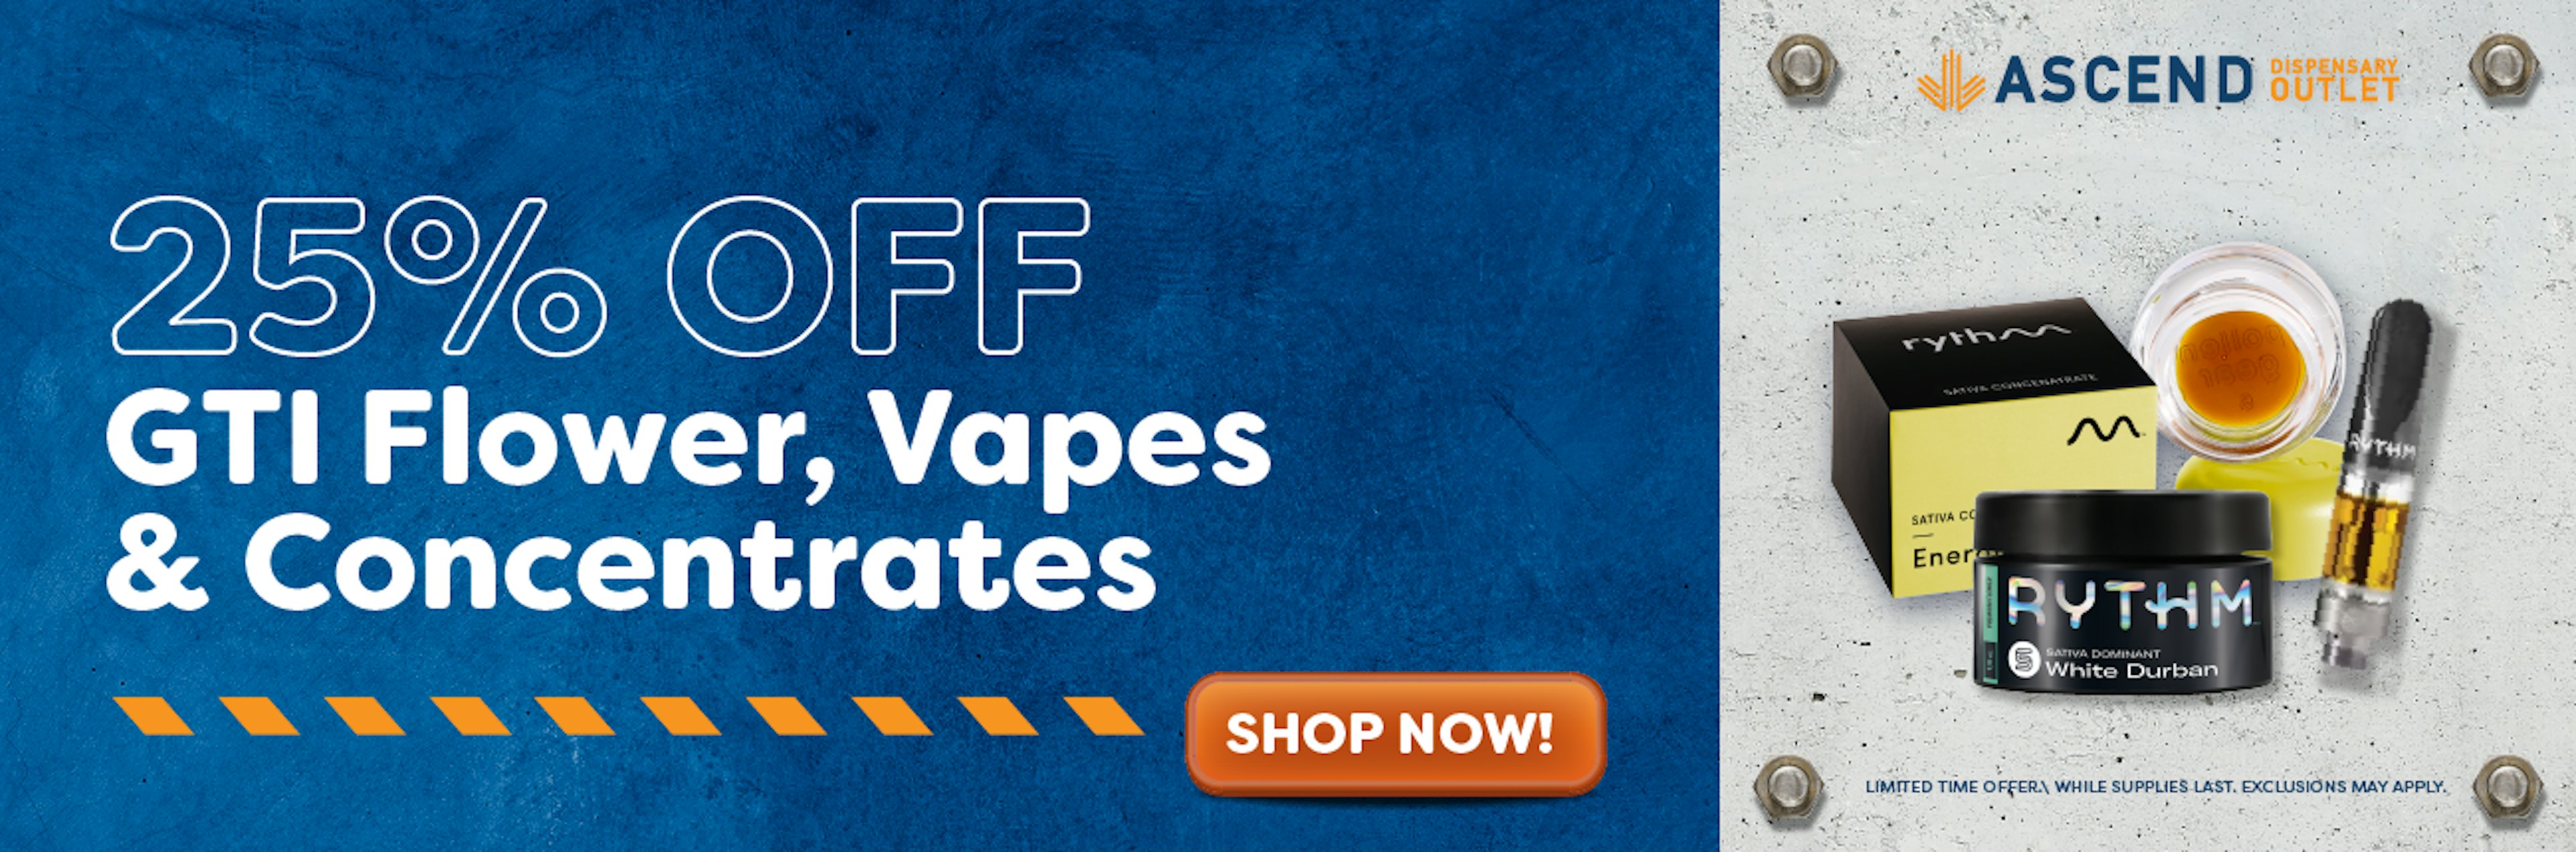 25% off GTI Flower/Vapes/Concentrates